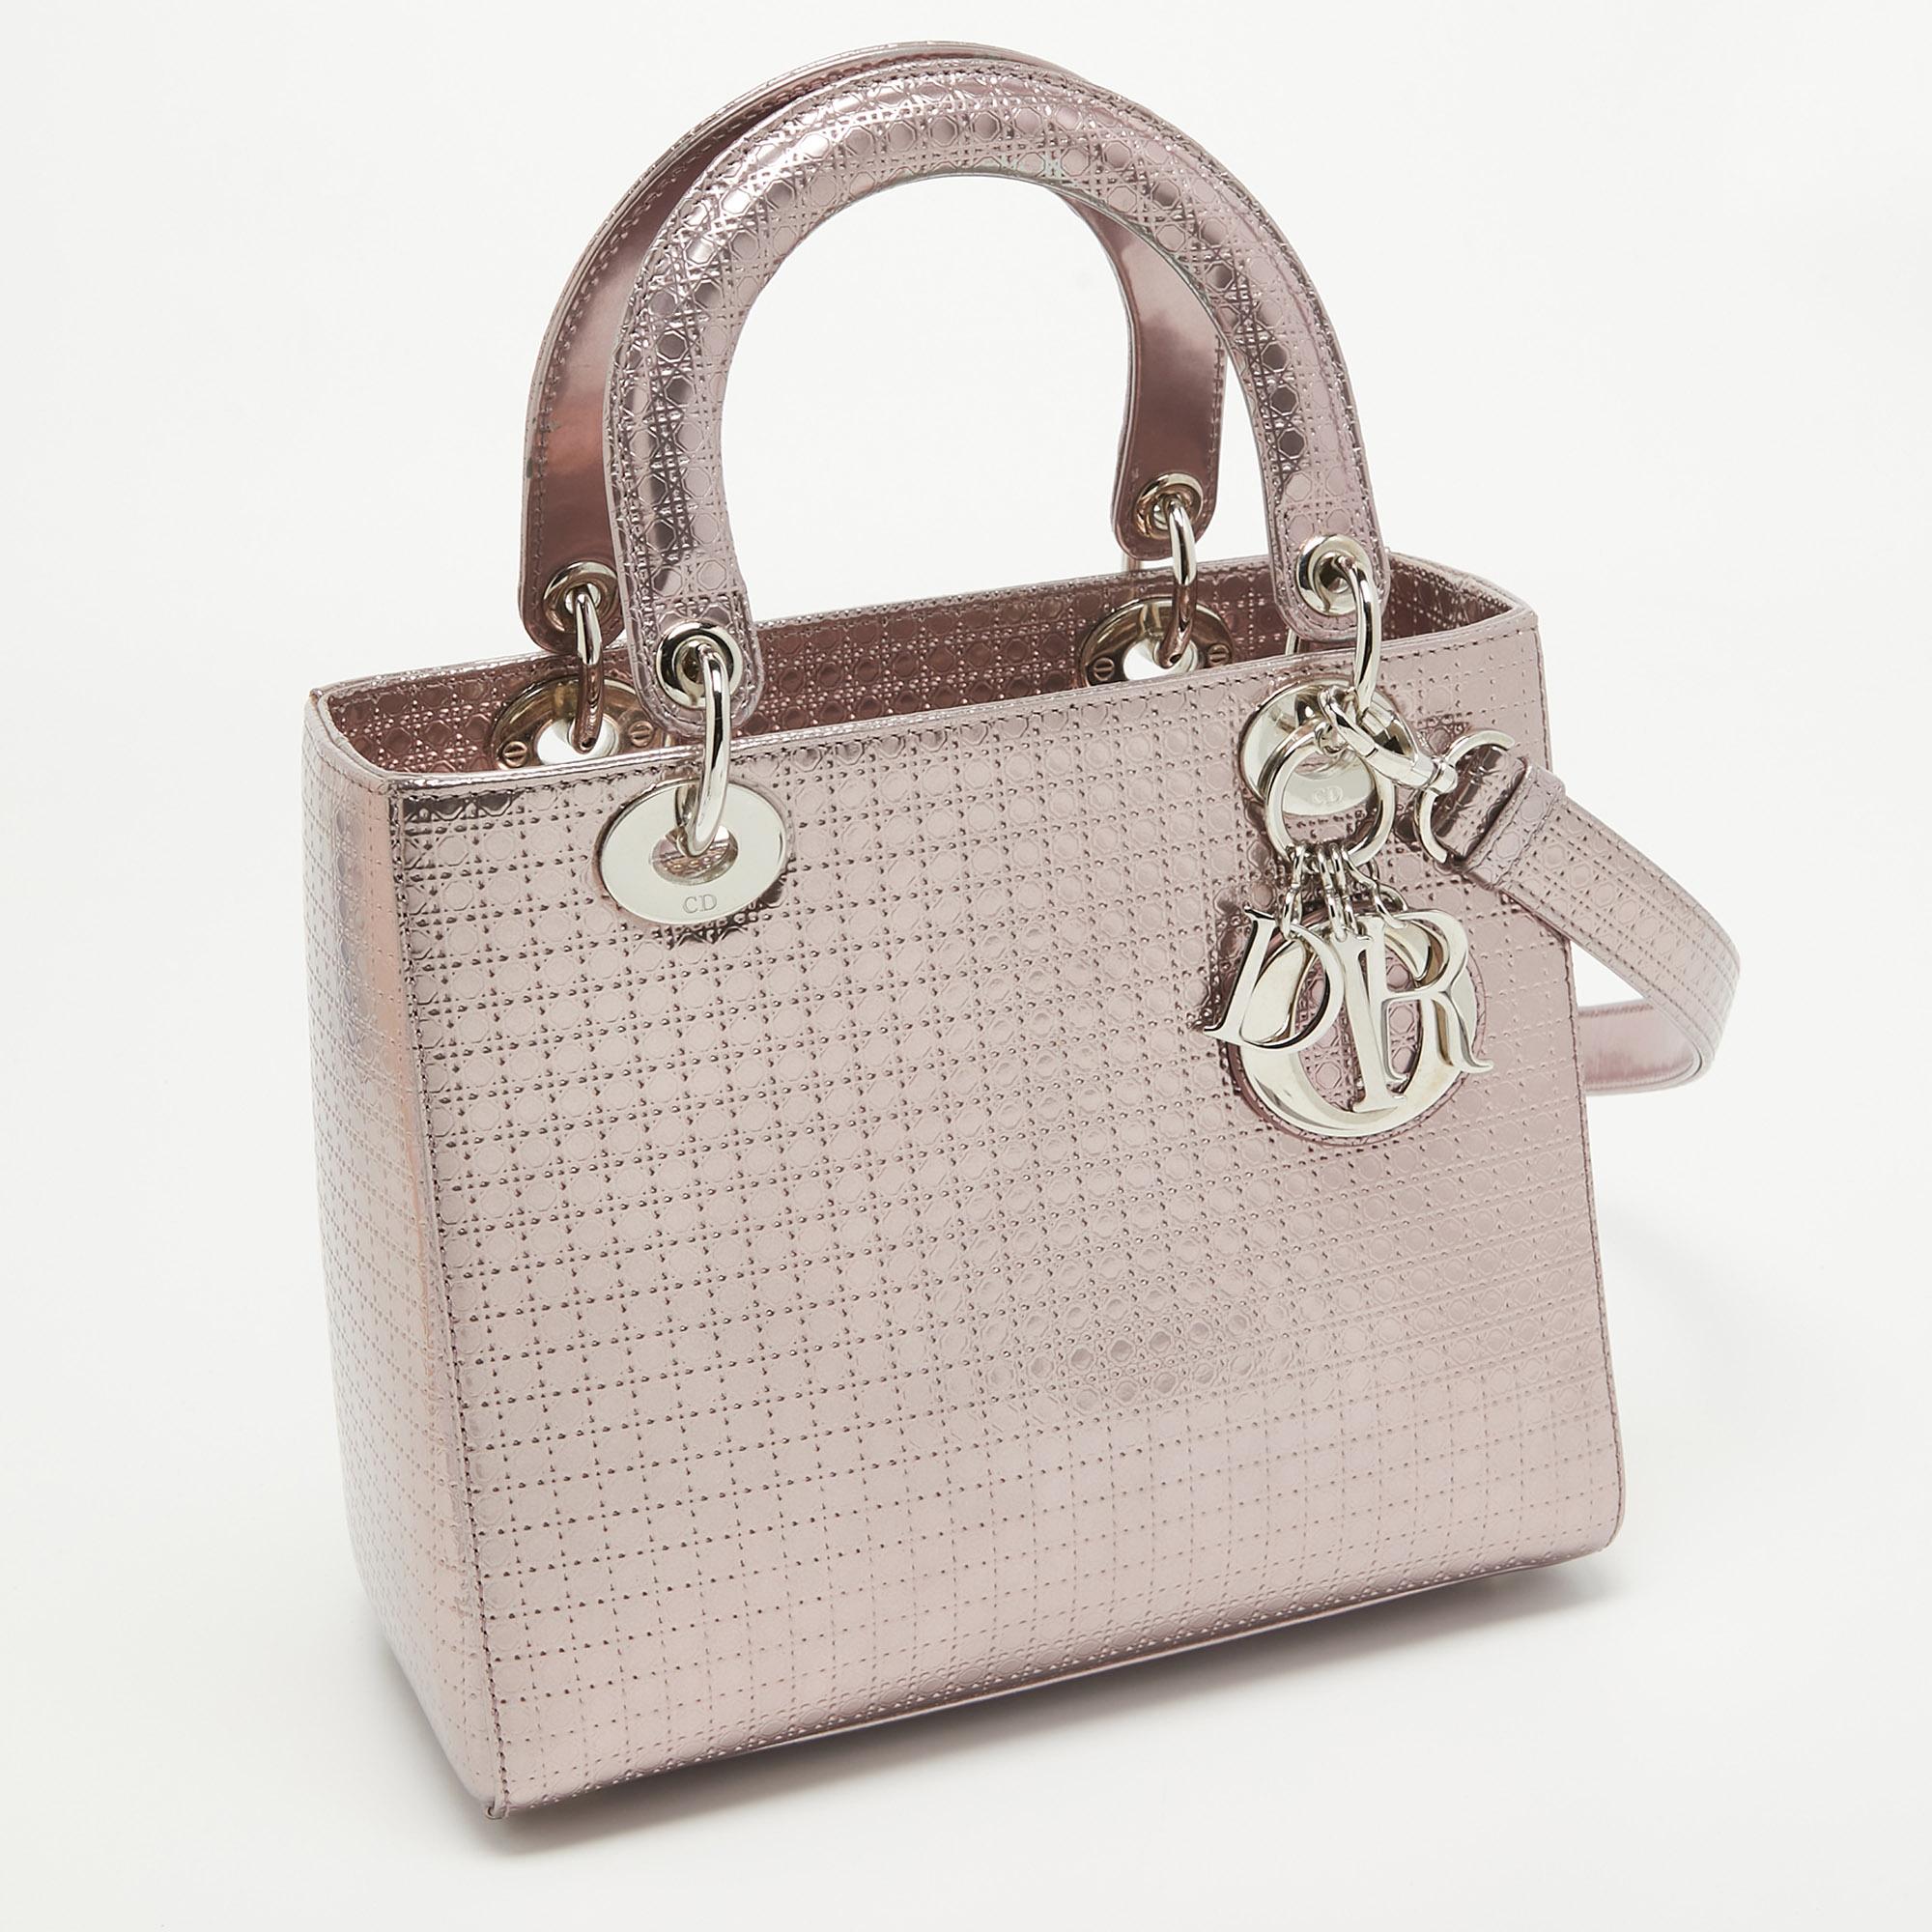 Due to detailed and innovative designs, Dior has managed to be at the top of fashion's hierarchy through the years. Infuse the signature aesthetics of the brand into your outfit by accessorizing it with this Lady Dior tote. With a classic design, it